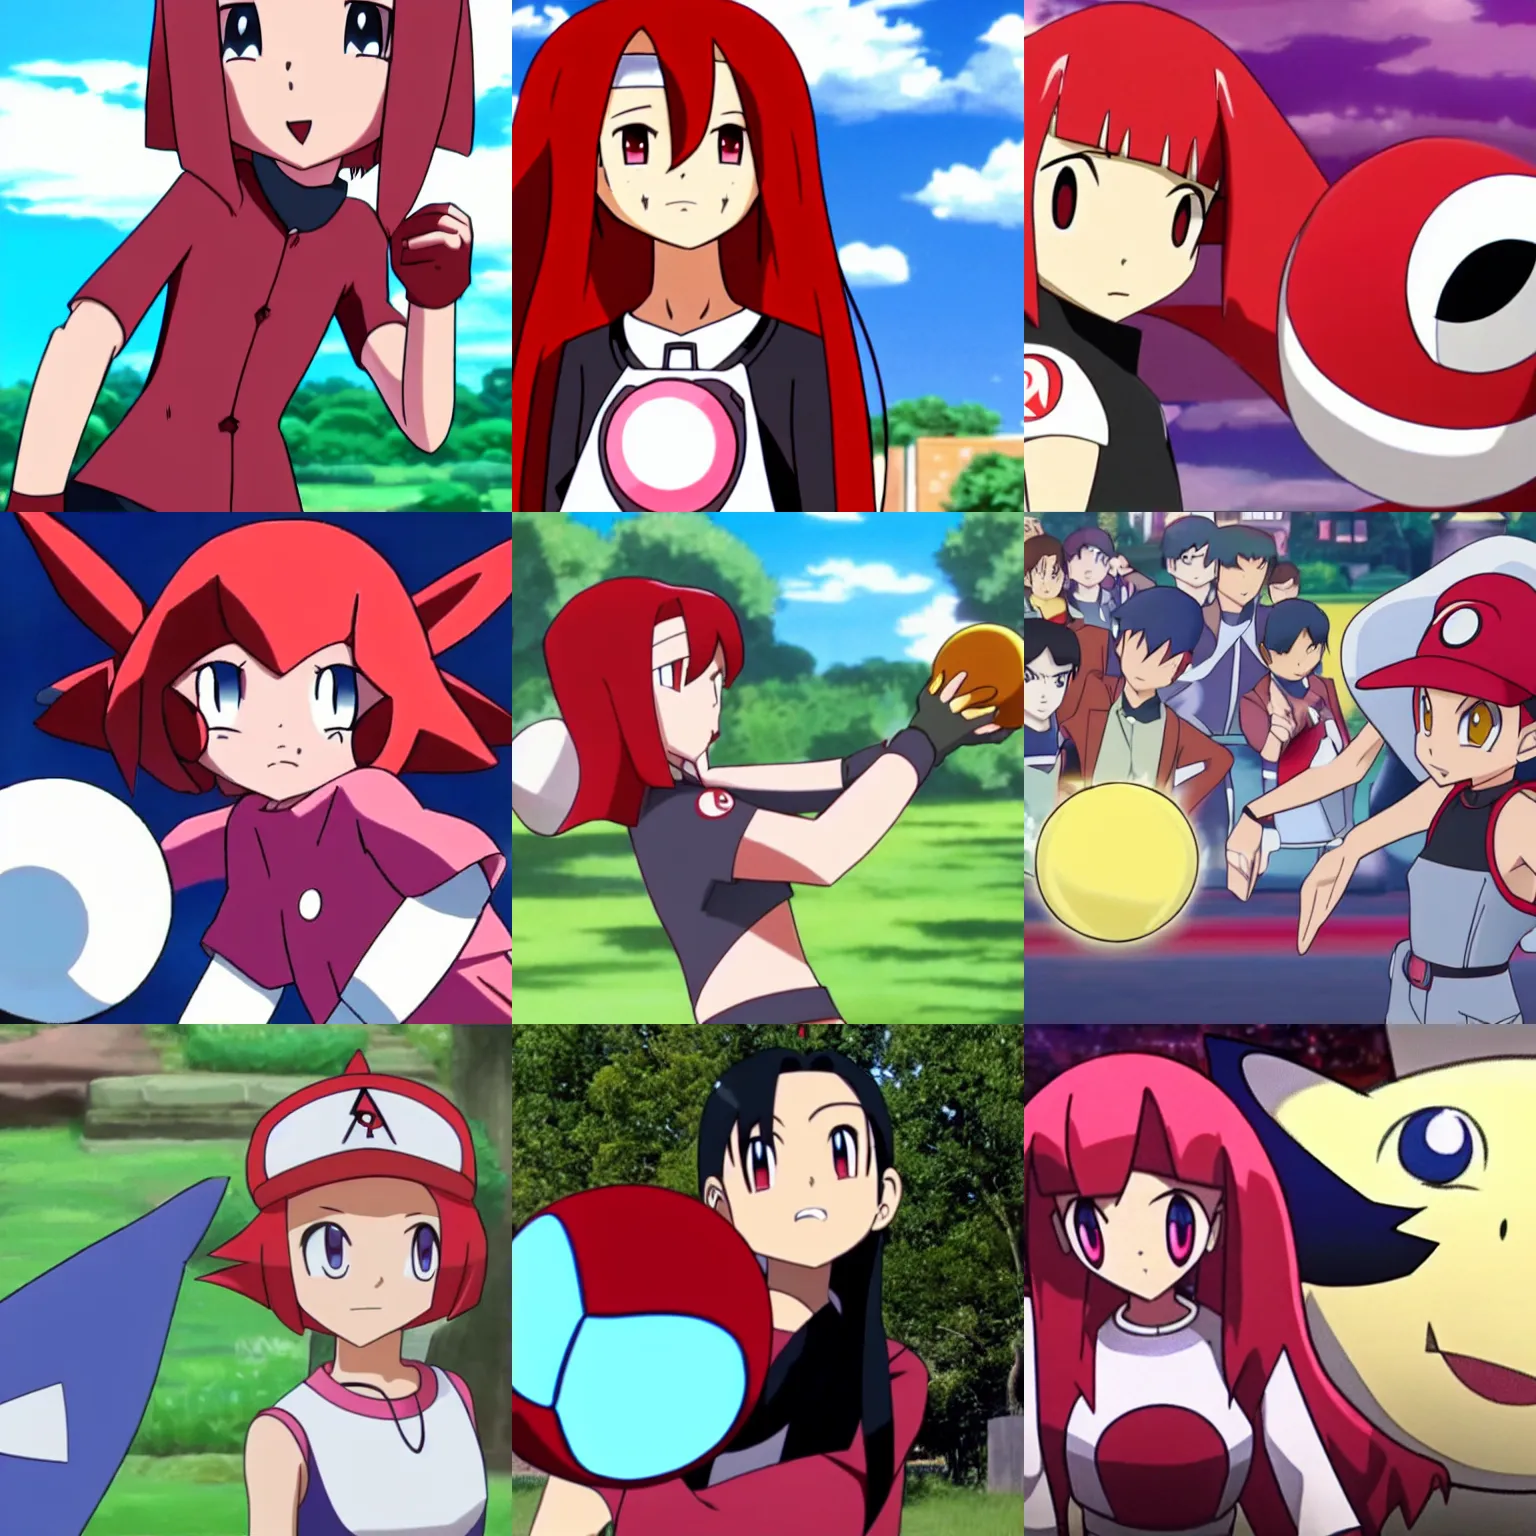 Prompt: jessie from team rocket throwing a pokeball, anime